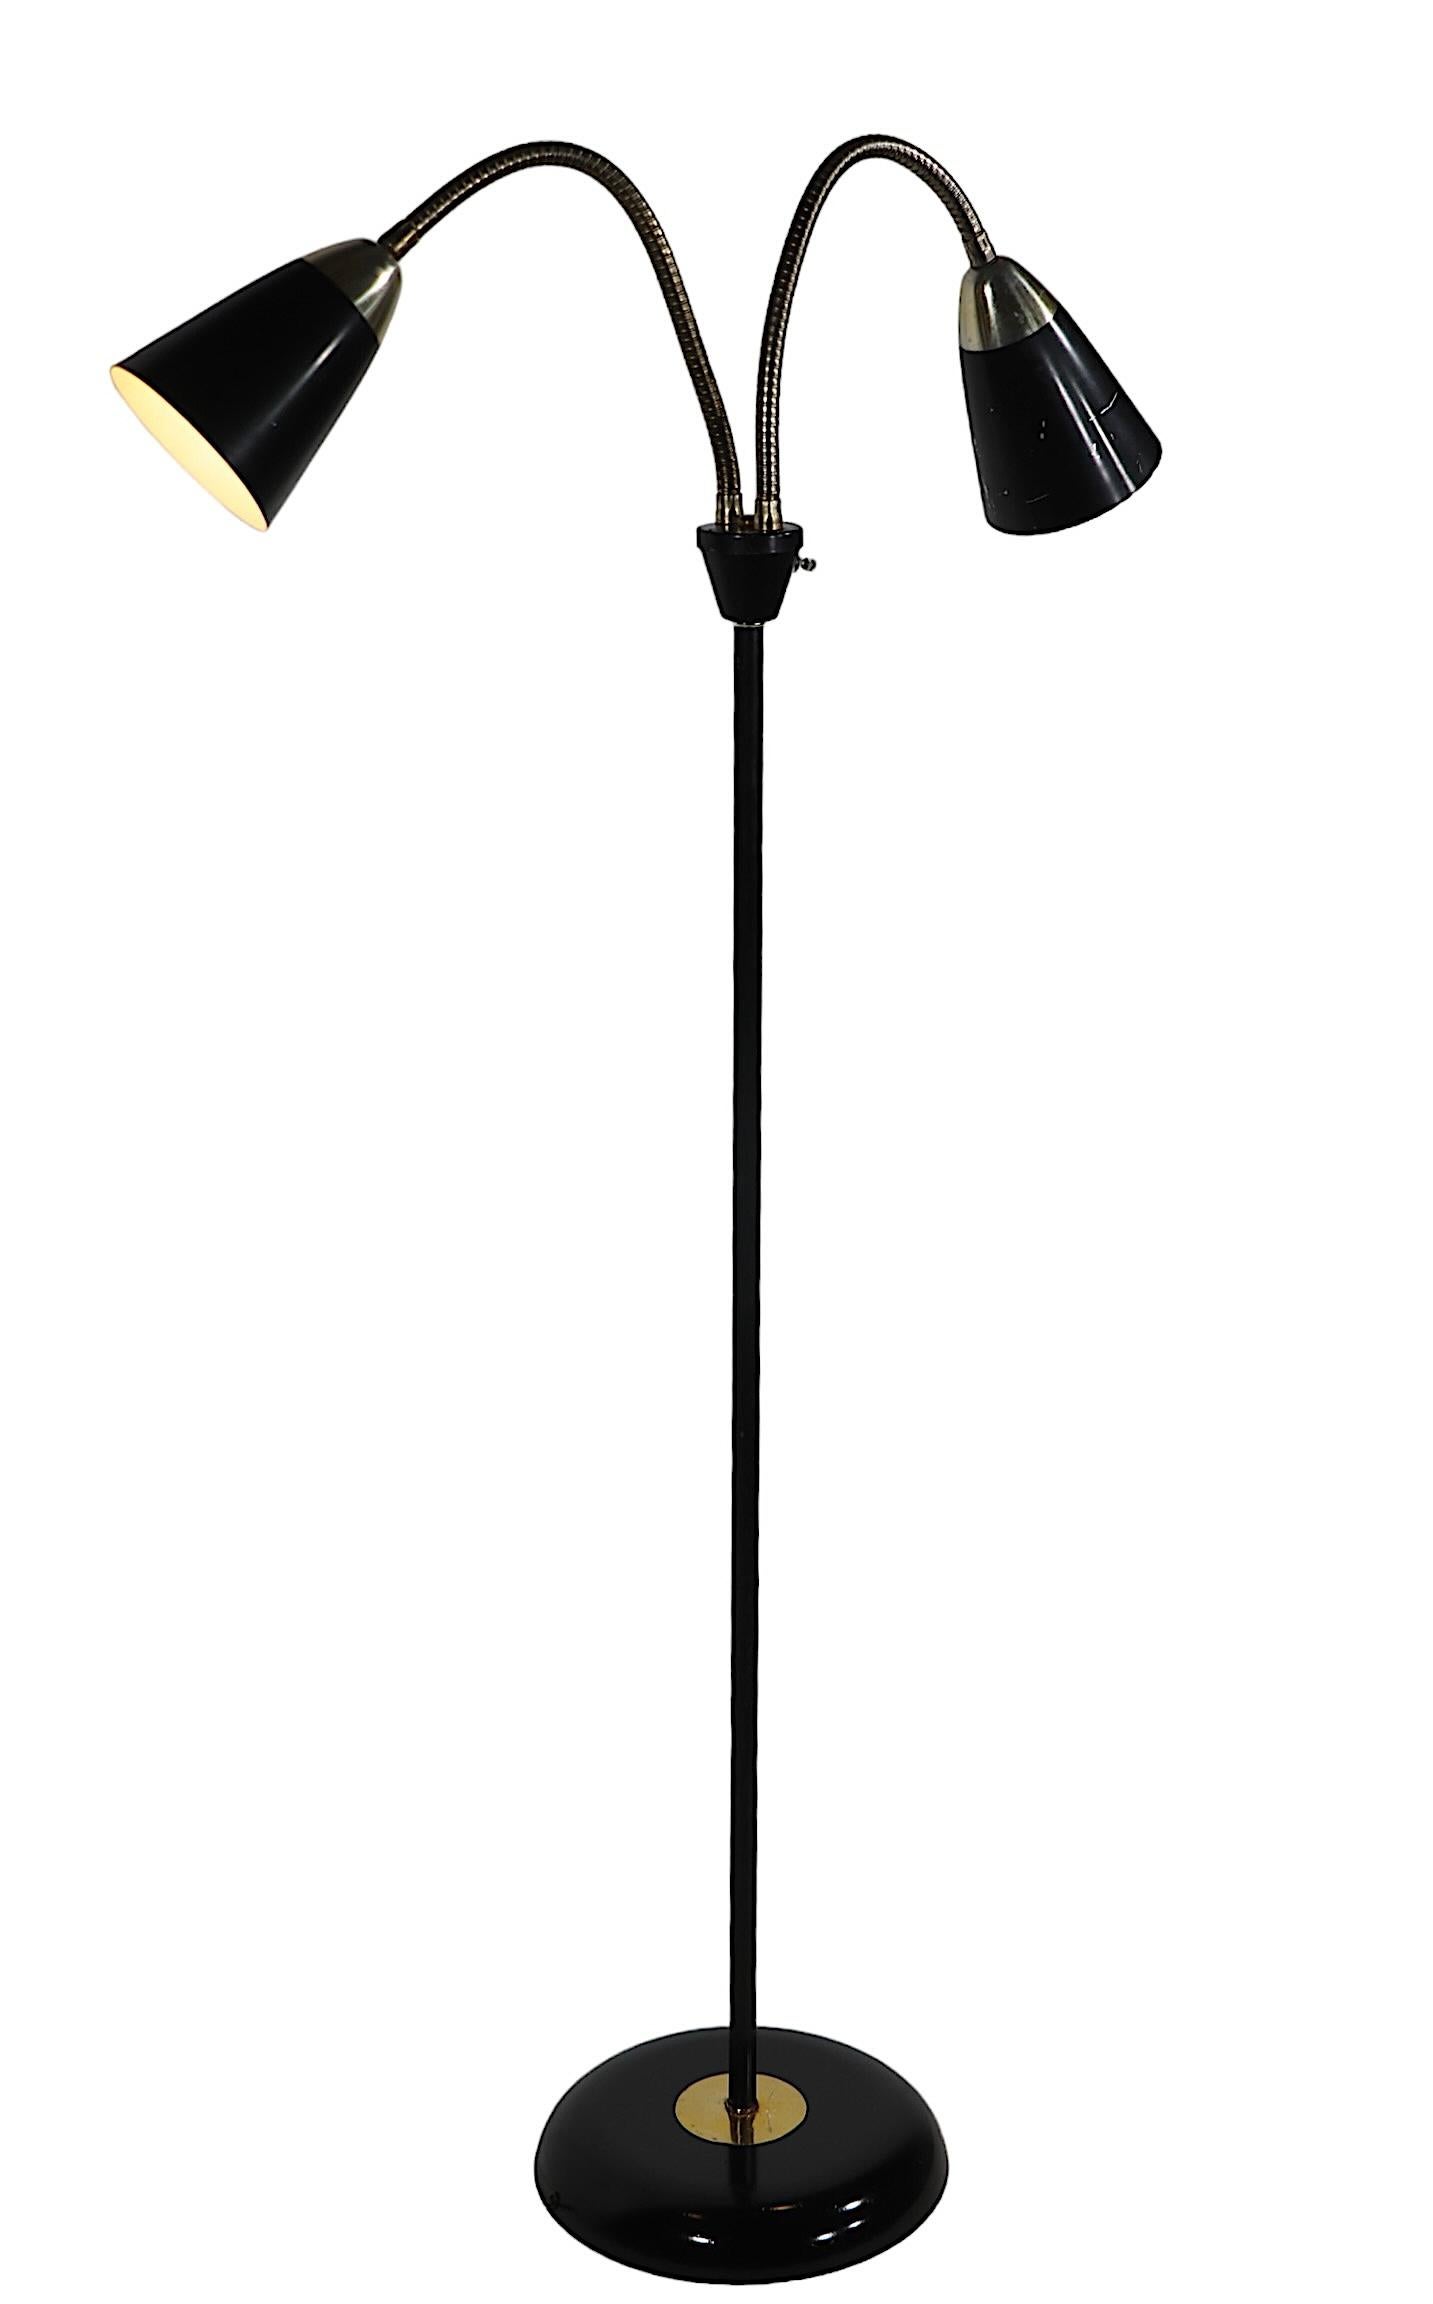 Iconic Mid Century two light gooseneck floor lamp, having flex arms with conical shades, on round plinth base. Designed by Gerald Thurston, for Lightolier, circa 1950's.  Often imitated, never duplicated form, this is the original model, it is in